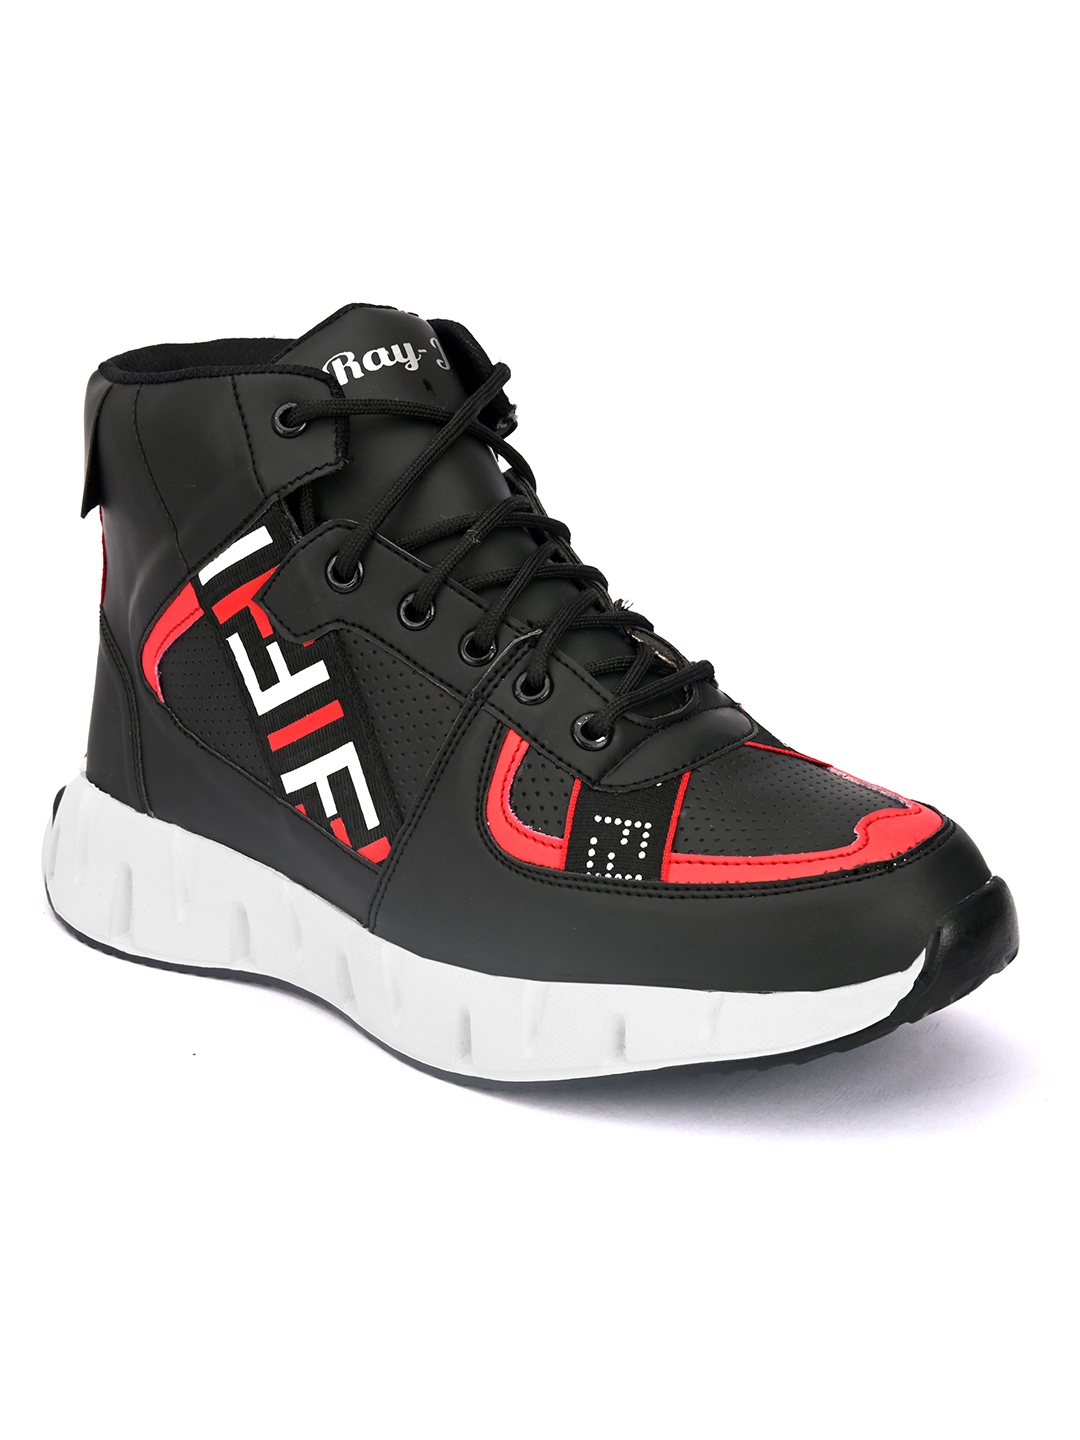 RAY J Black Lace-Up Sneakers For Men